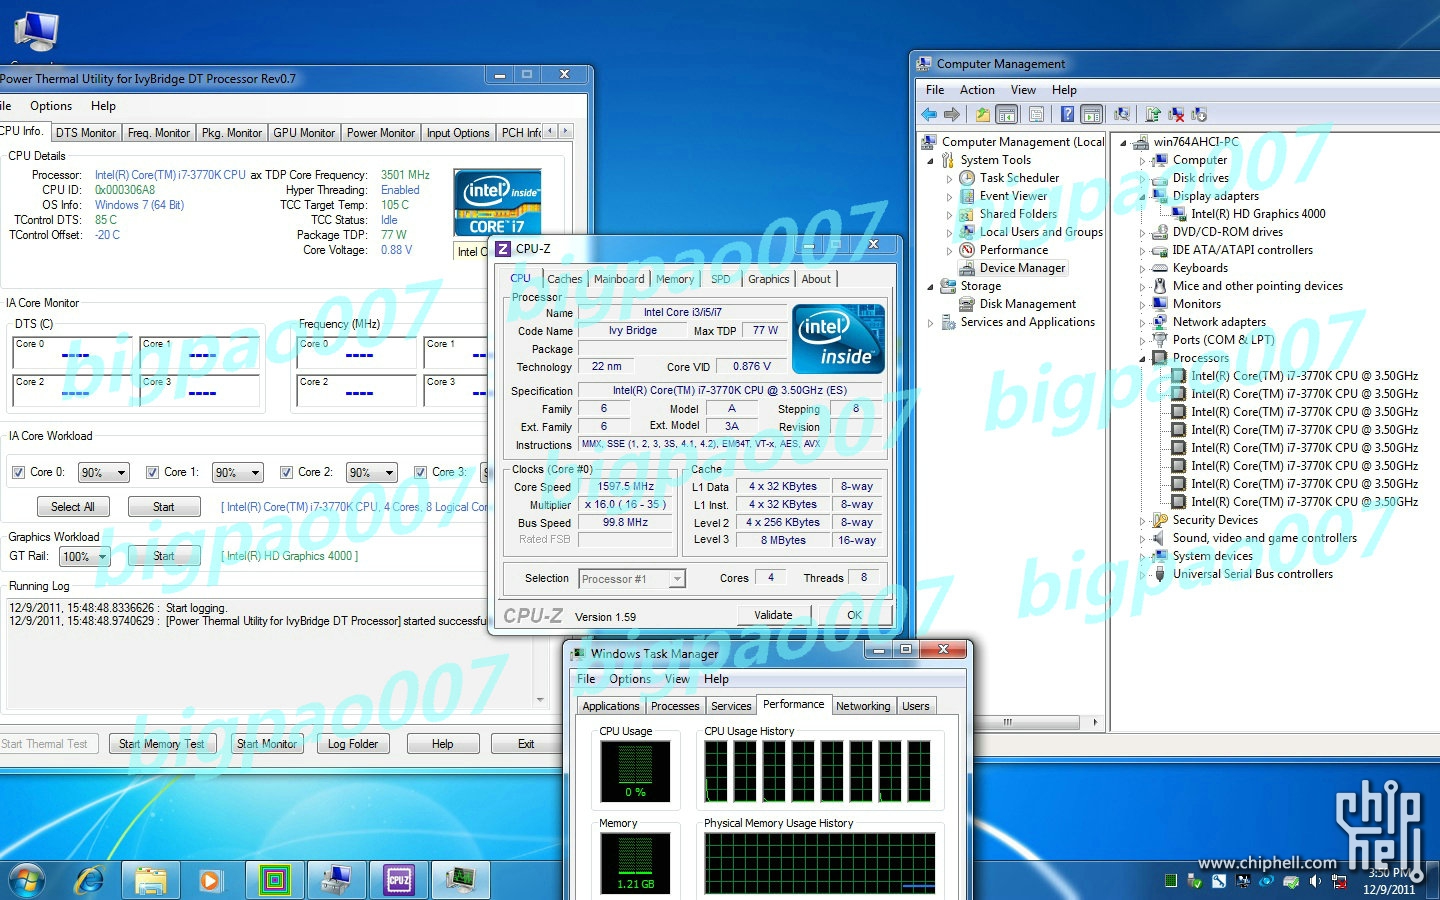 Media asset in full size related to 3dfxzone.it news item entitled as follows: On line nuovi benchmark della cpu Intel Core i7-3770  (Ivy Bridge) | Image Name: news16219_1.jpg